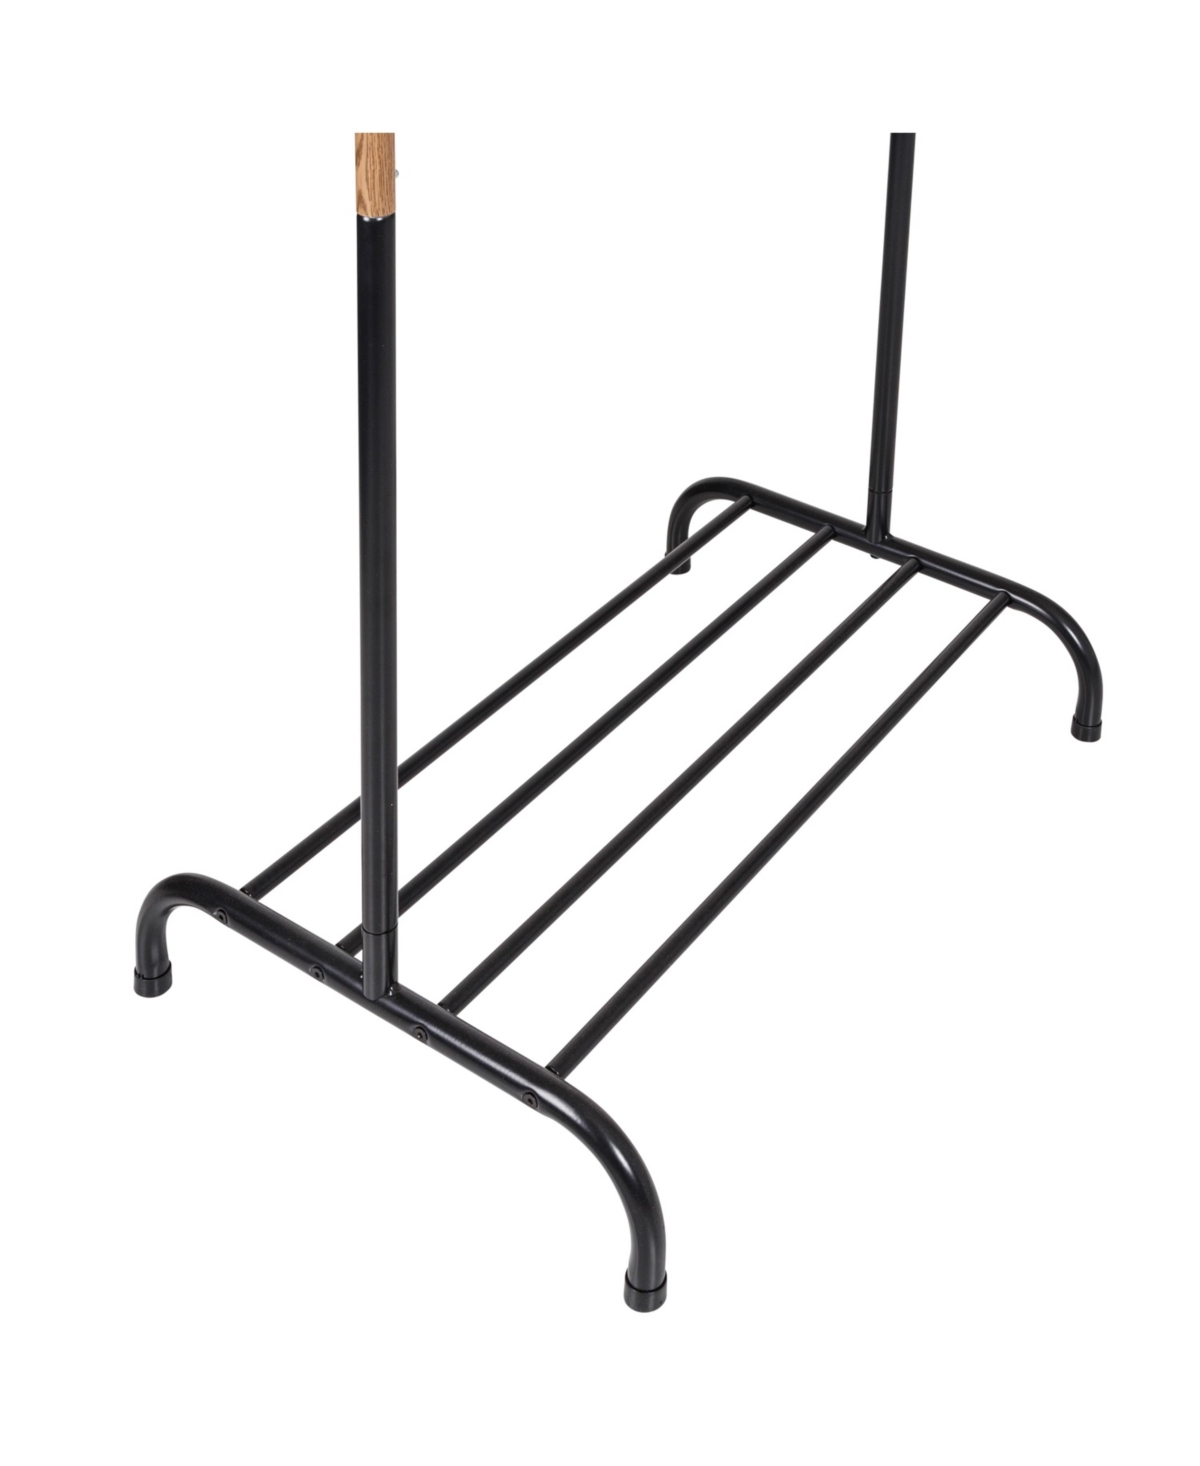 Shop Honey Can Do Shoe Shelf And Hanging Bar For Clothes With Single Garment Rack In Black